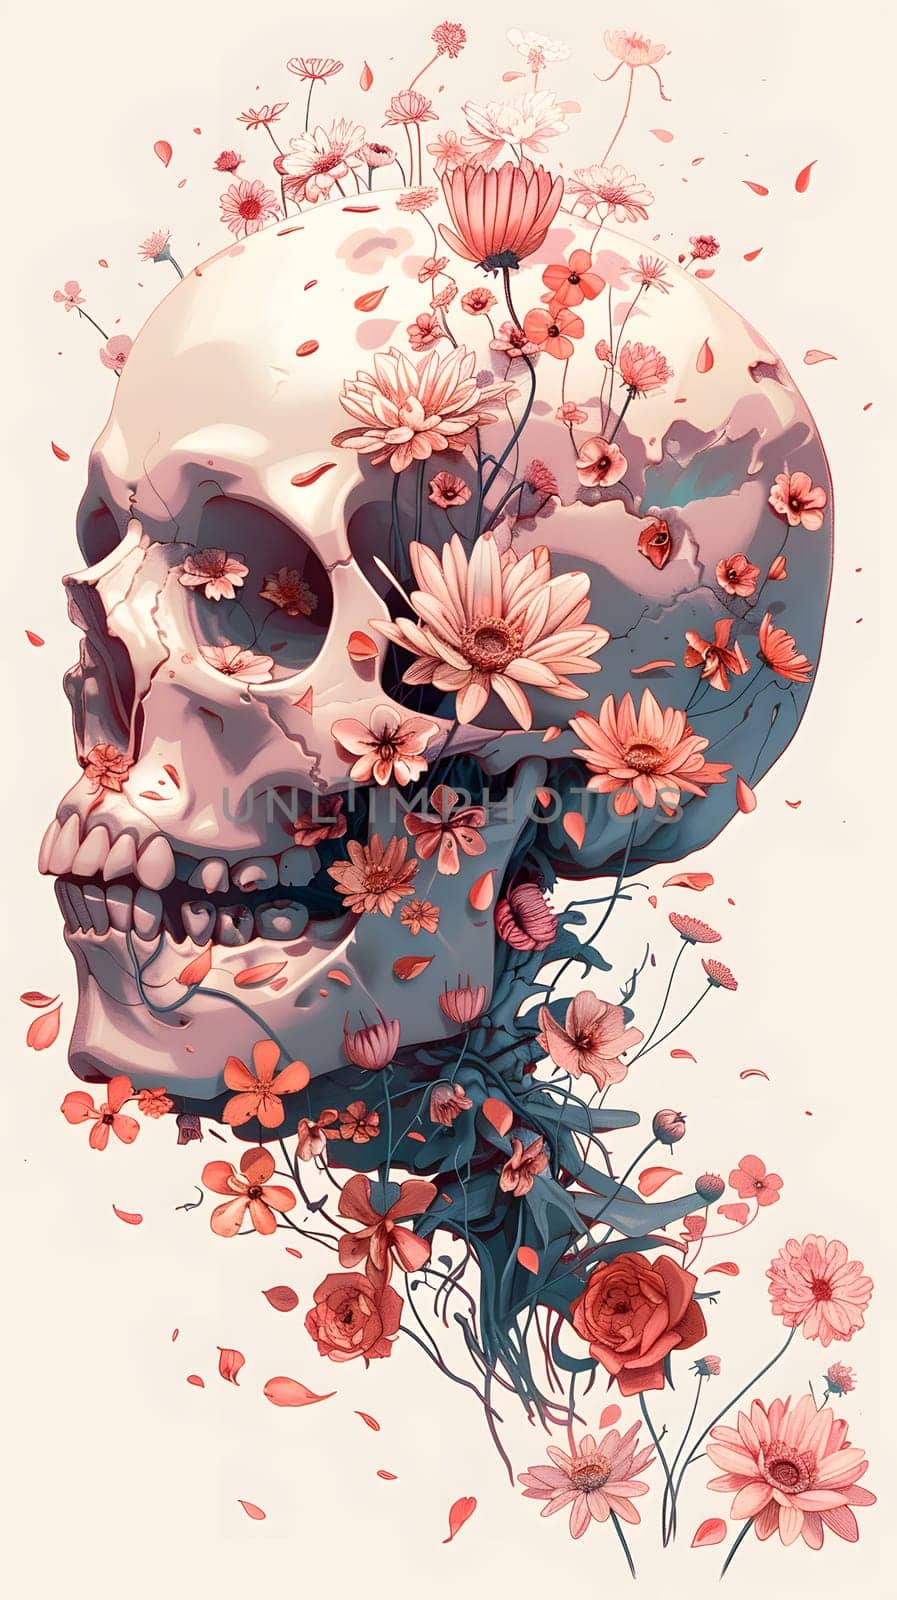 A skull is depicted surrounded by flowers in a visual arts painting, with delicate petals and bone structures contrasting against a white background